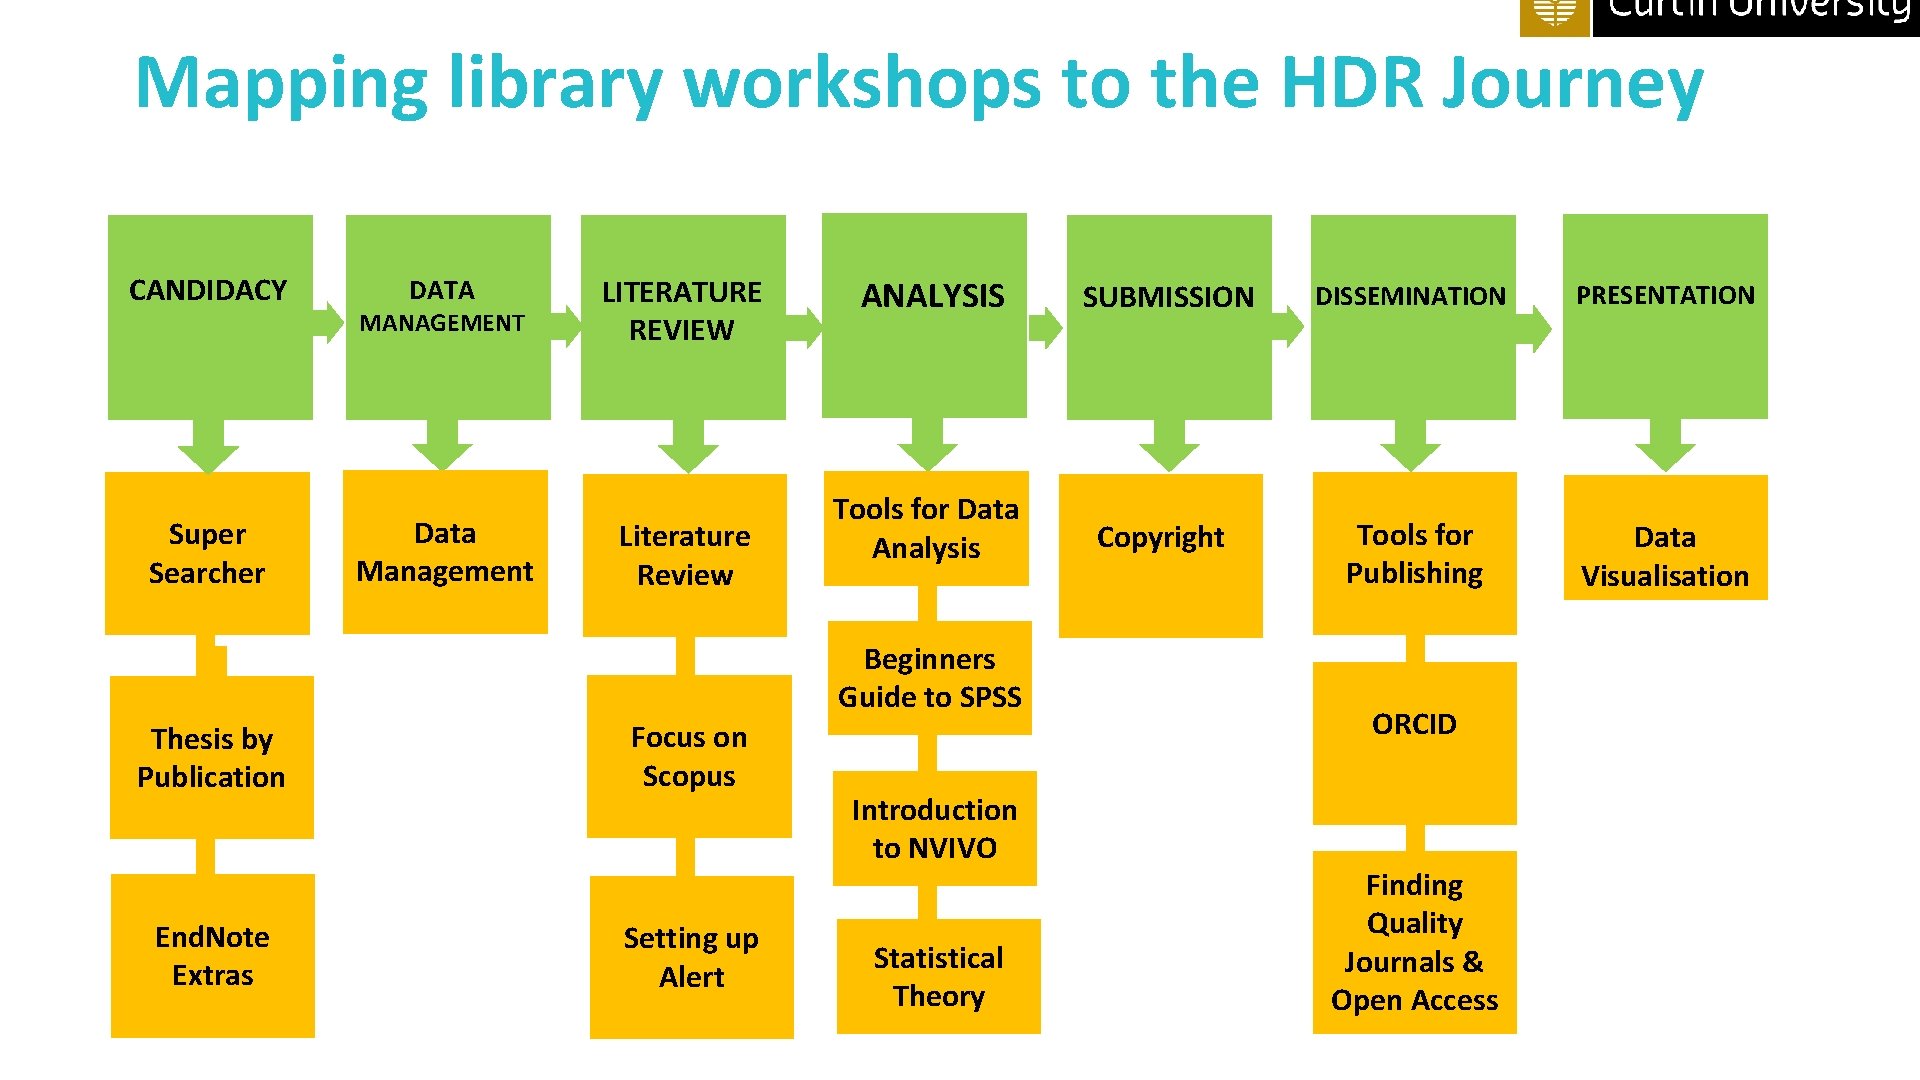 Mapping library workshops to the HDR Journey CANDIDACY Super Searcher DATA MANAGEMENT Data Management